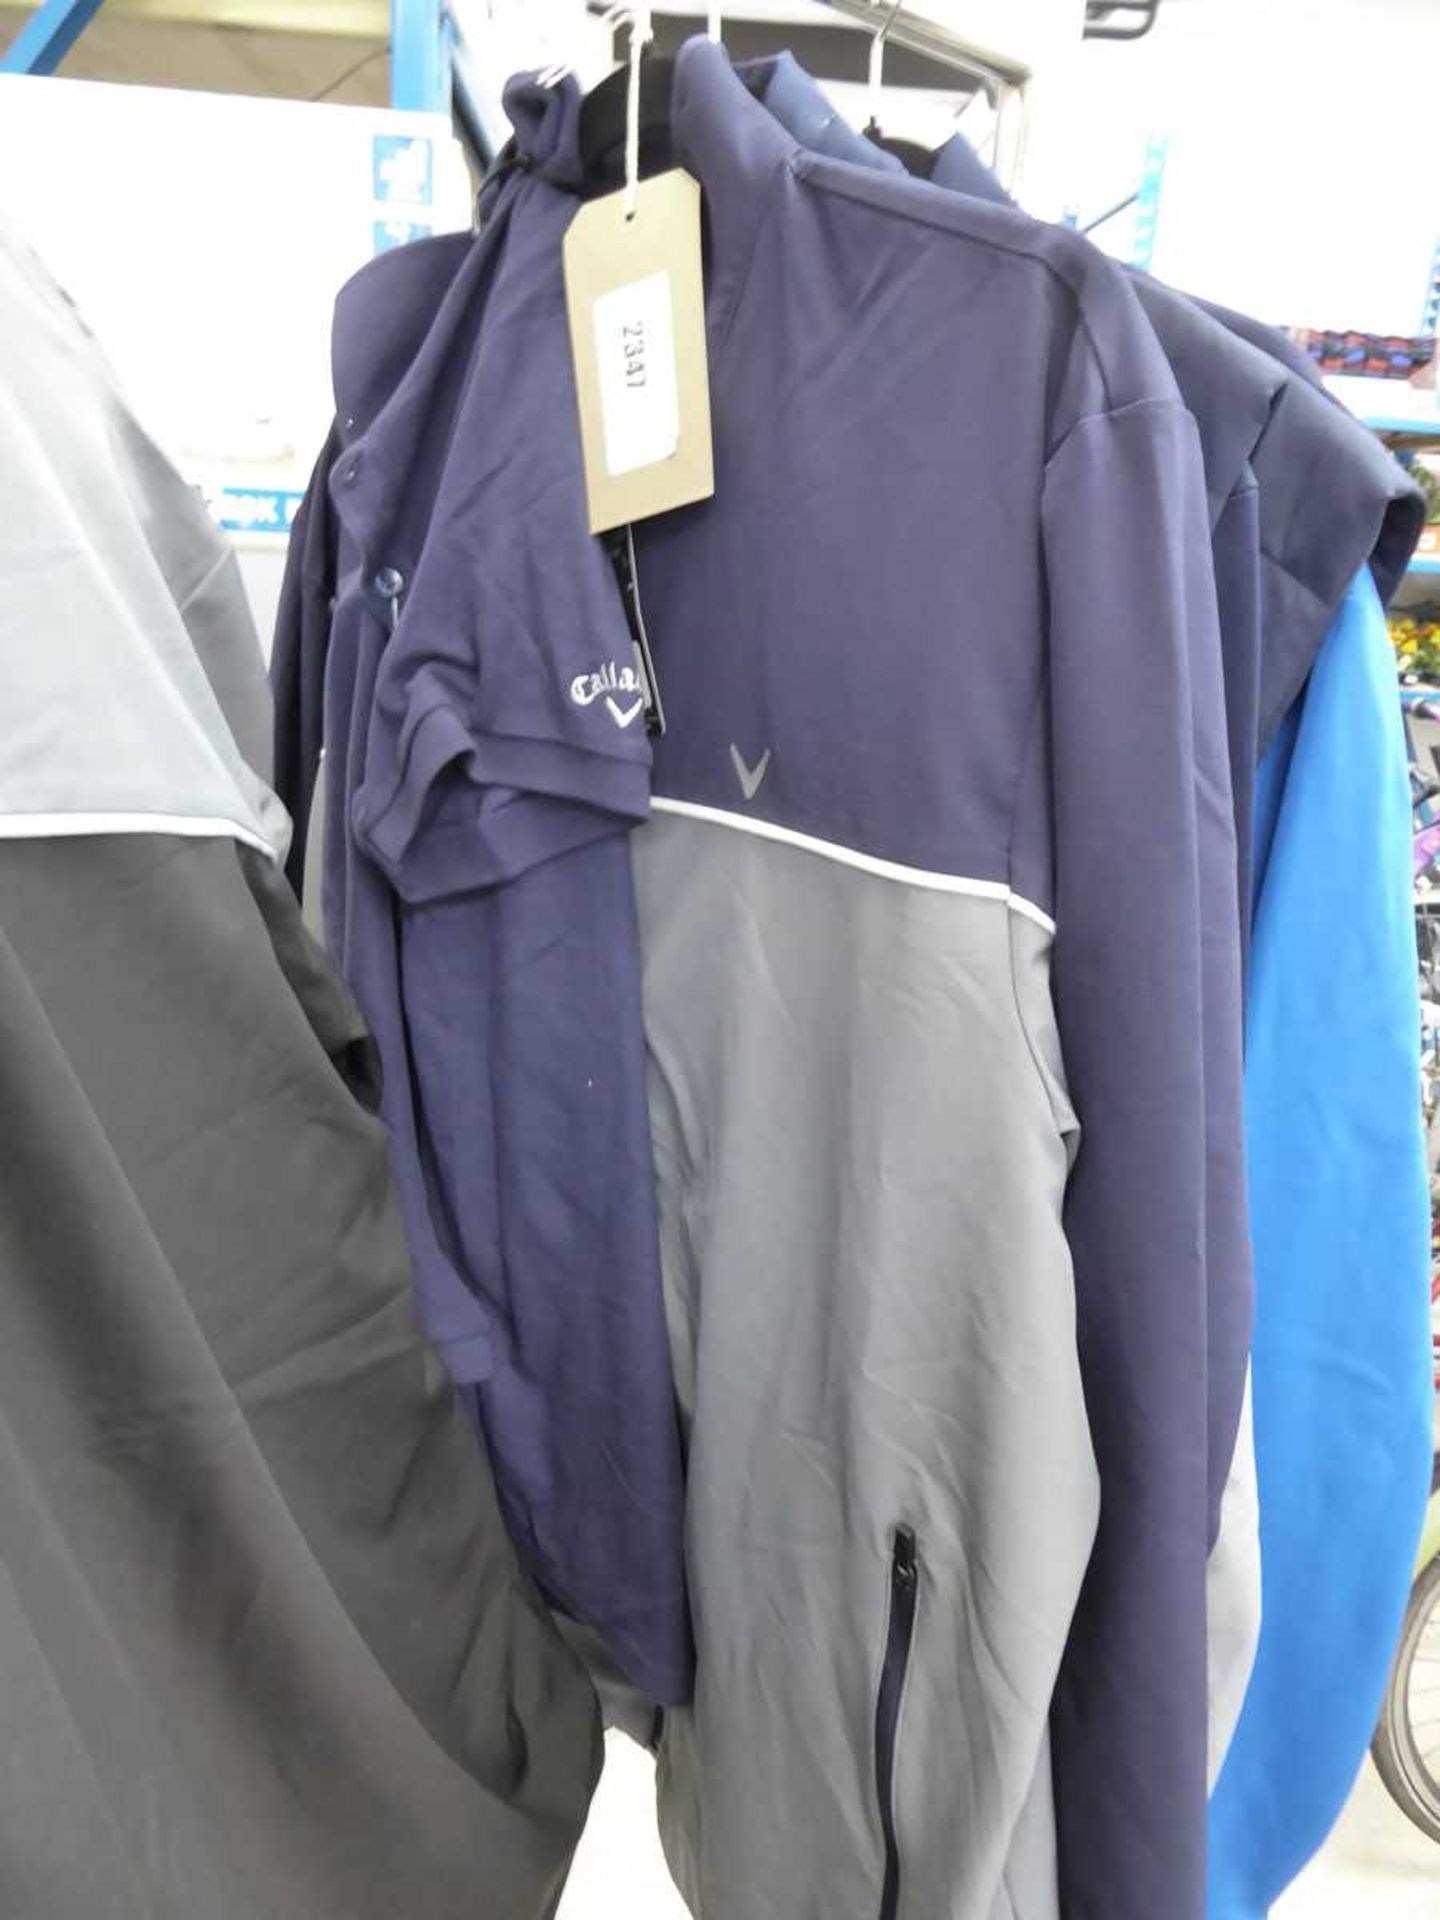 +VAT Callaway full zip jacket in grey and blue with Callaway polo shirt in navy (size L)